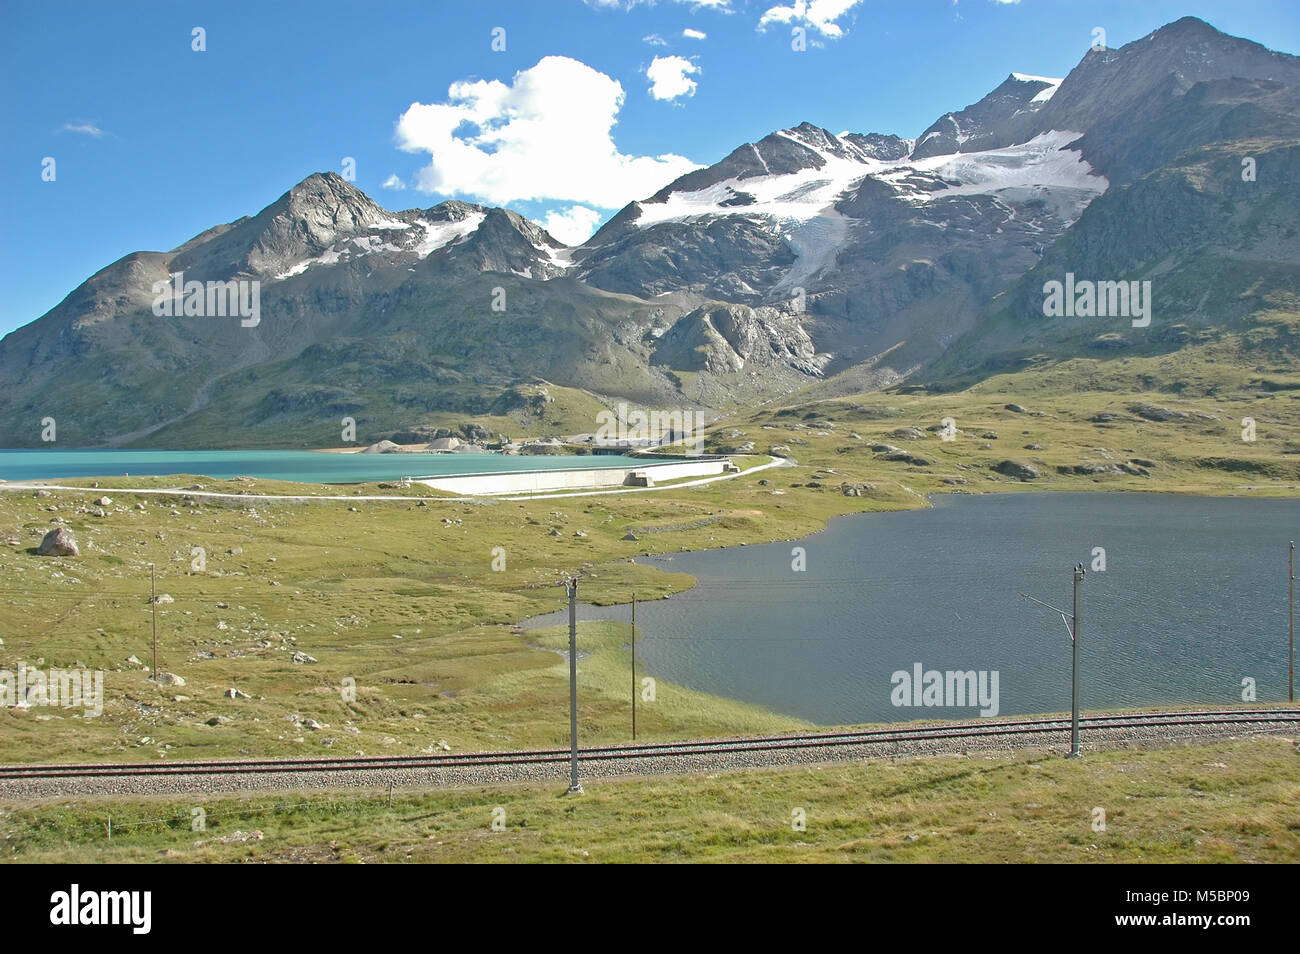 View from the Bernina Pass in southern Switzerland above St Moritz, with the railway lines of the Bernina Express which crosses the pass. And lakes Bi Stock Photo